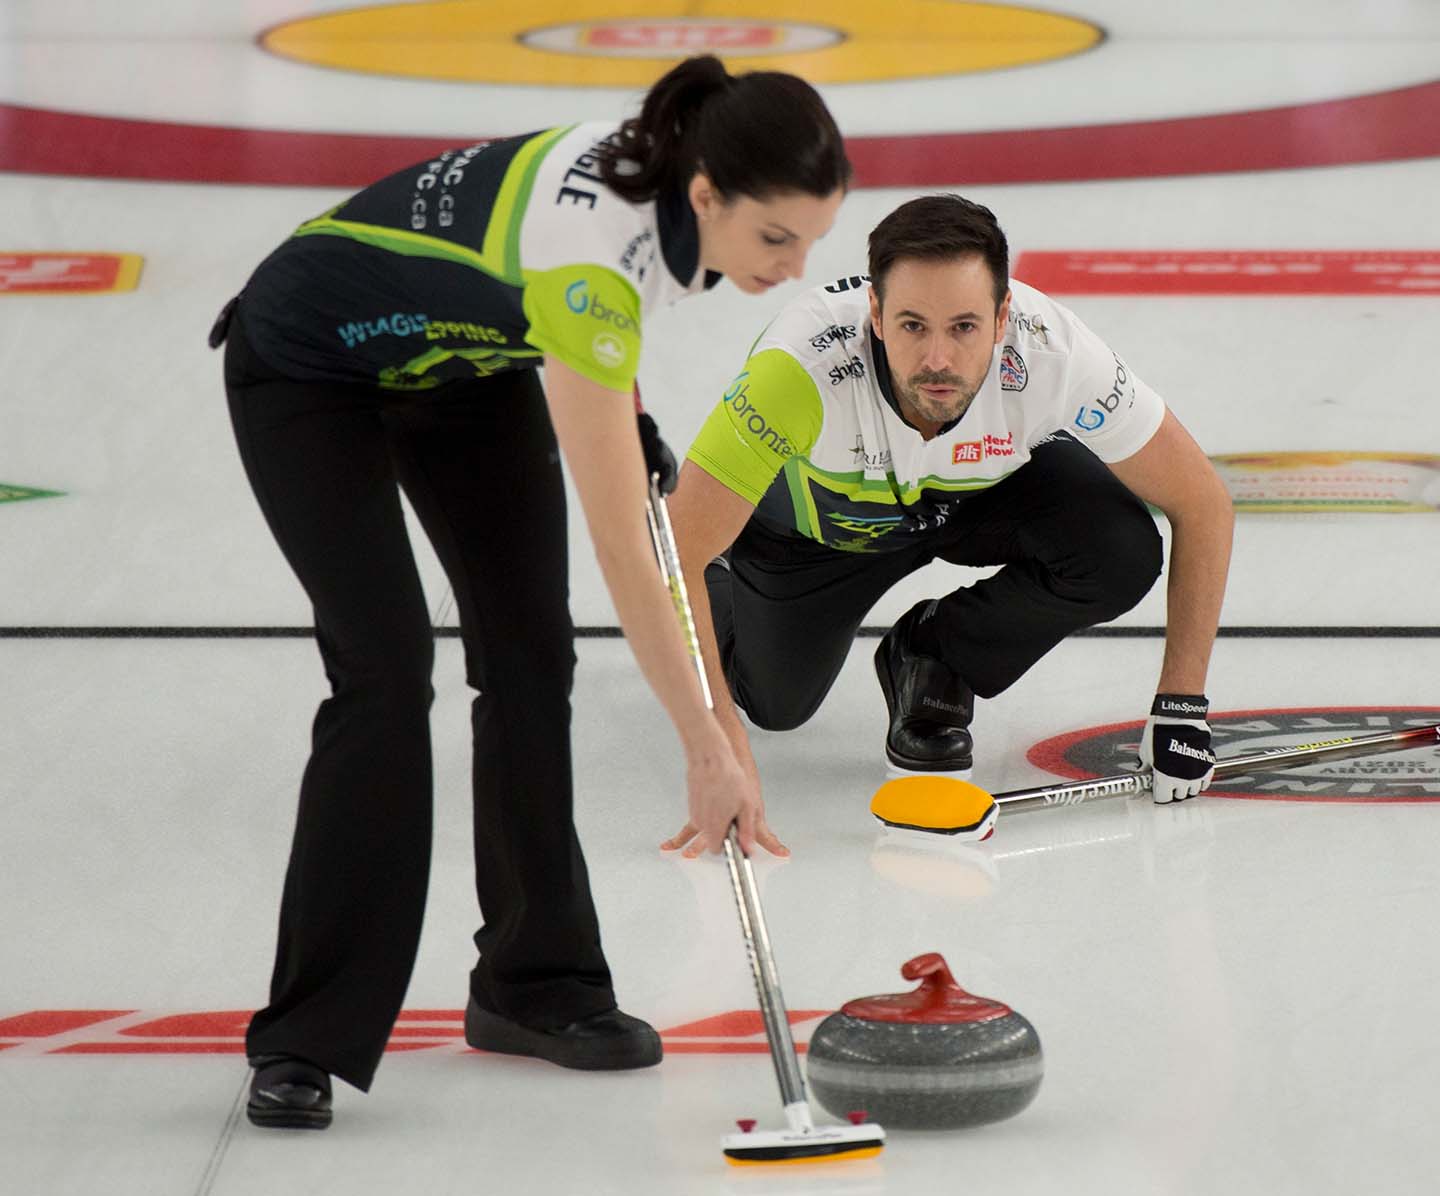 Curling Canada Trials spot on the line!